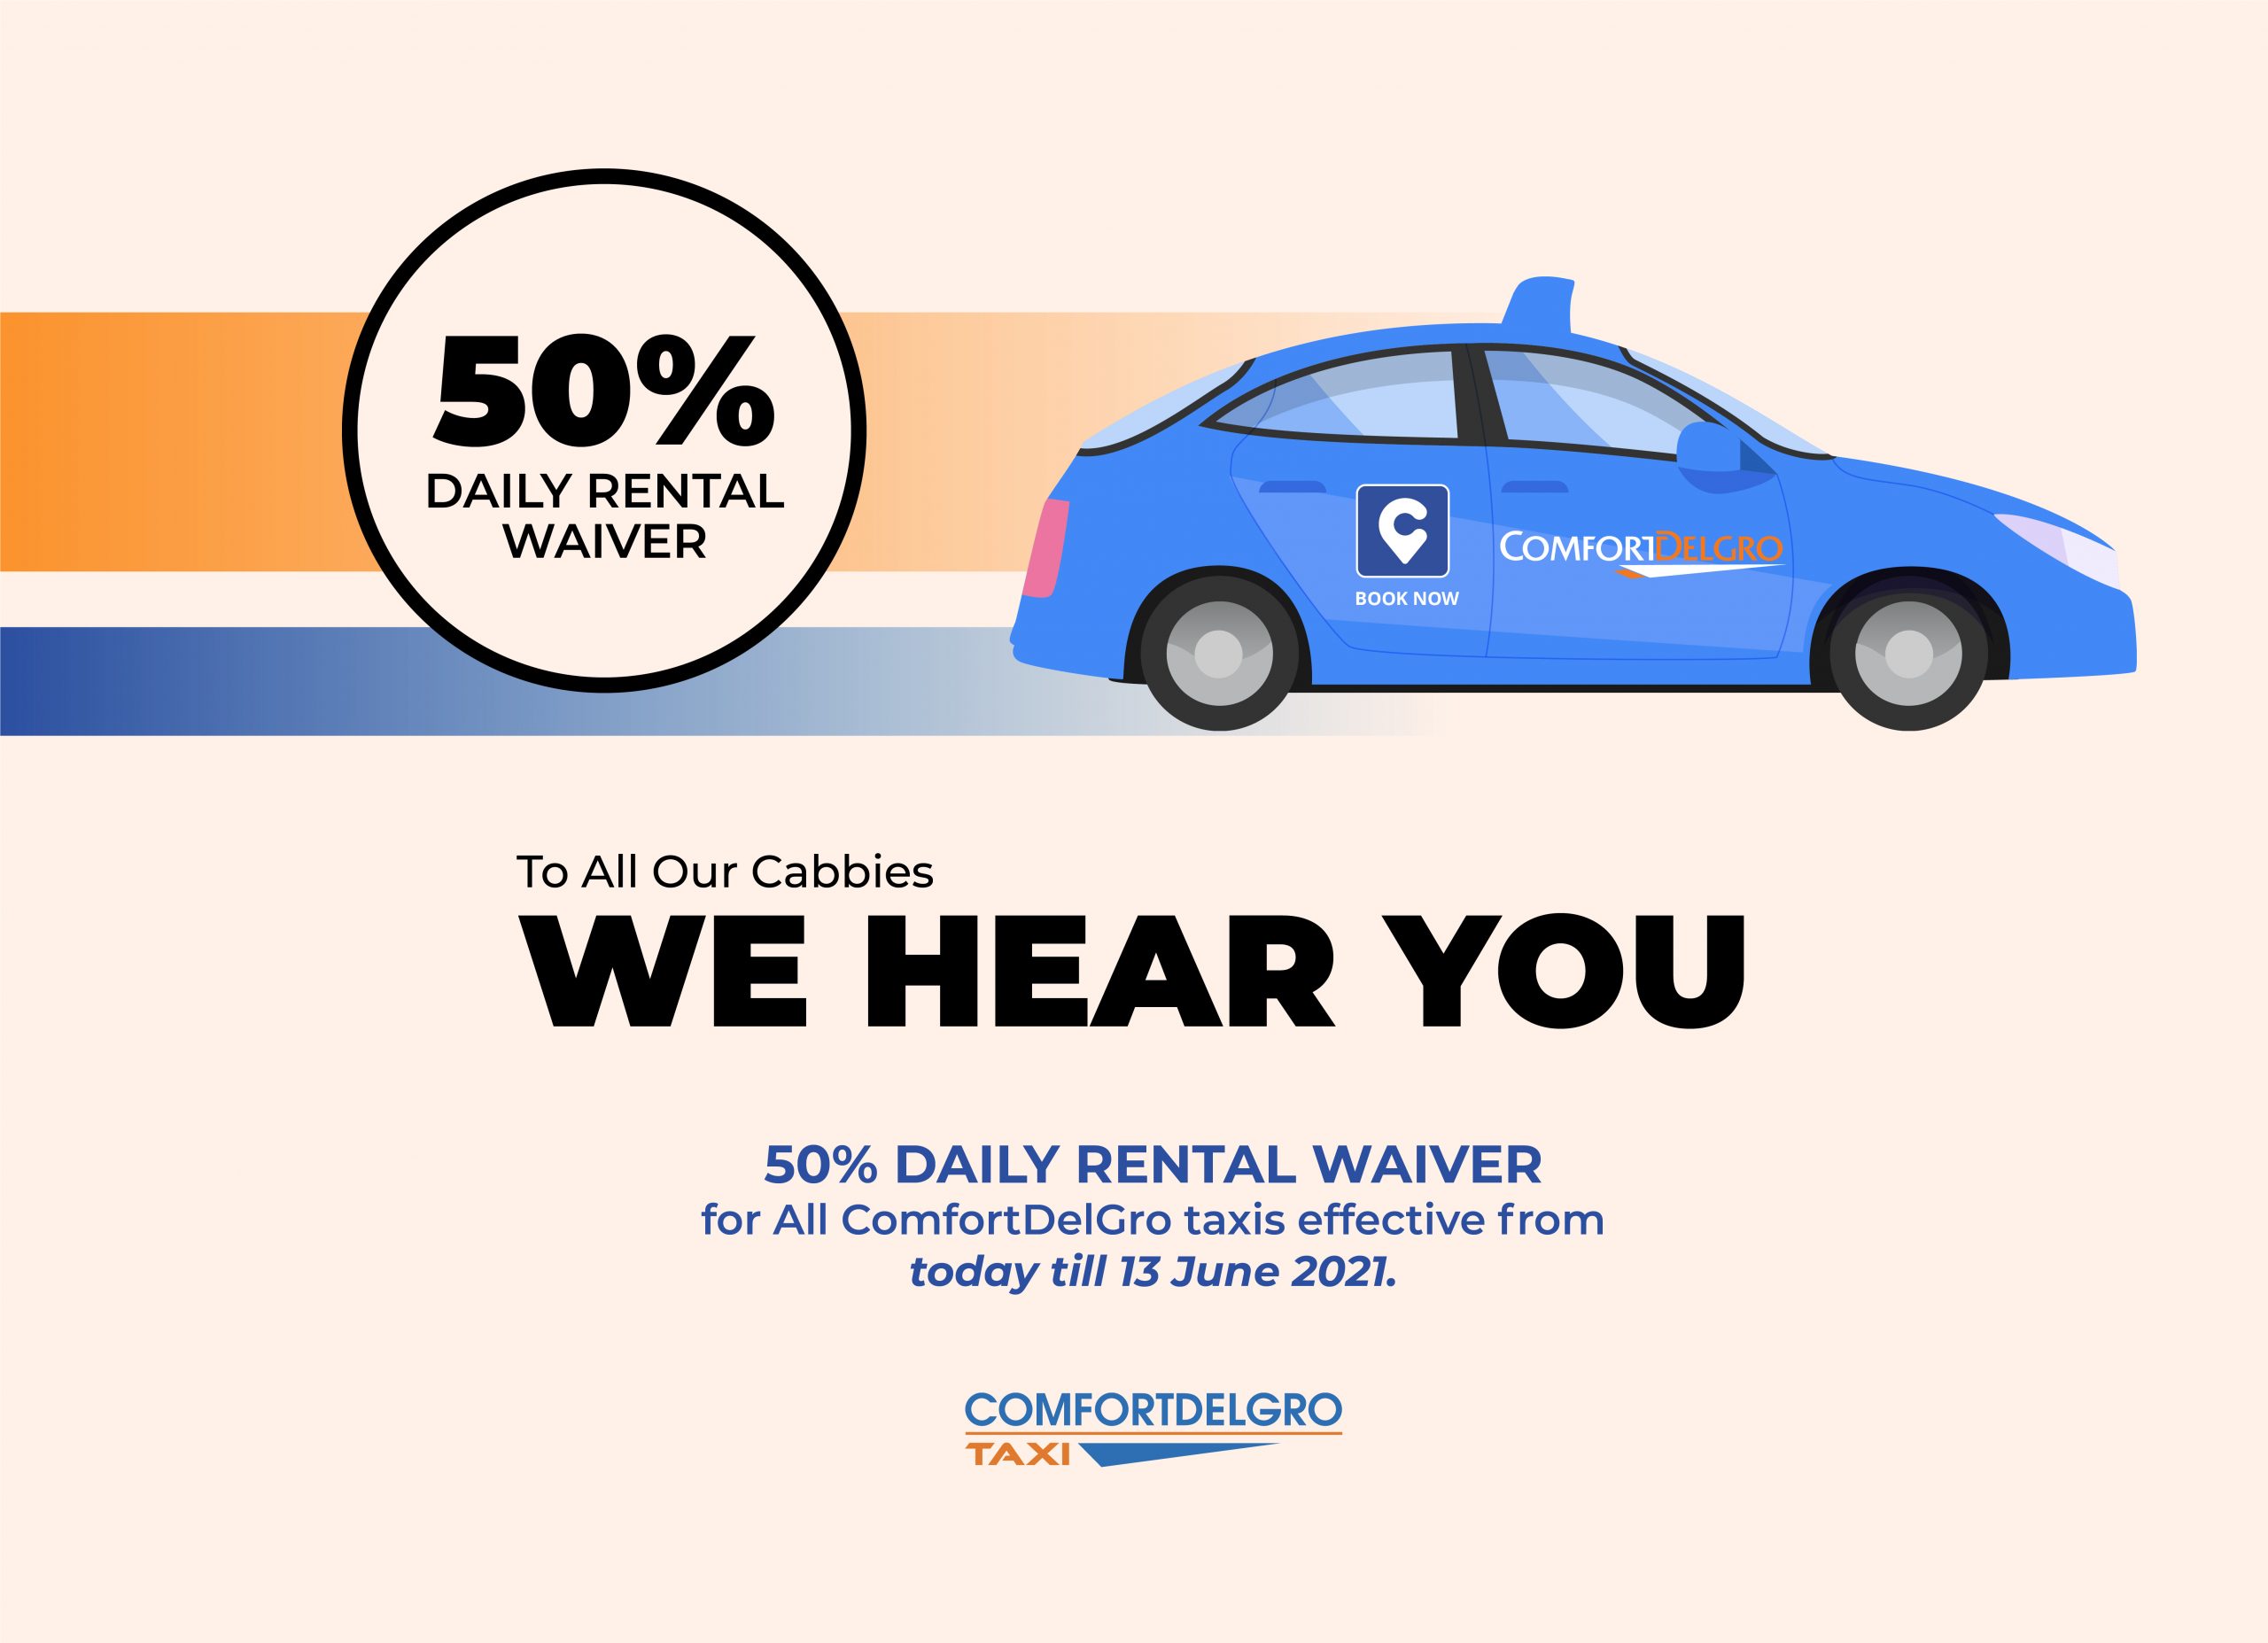 50% daily rental waiver effective from today till 13 June